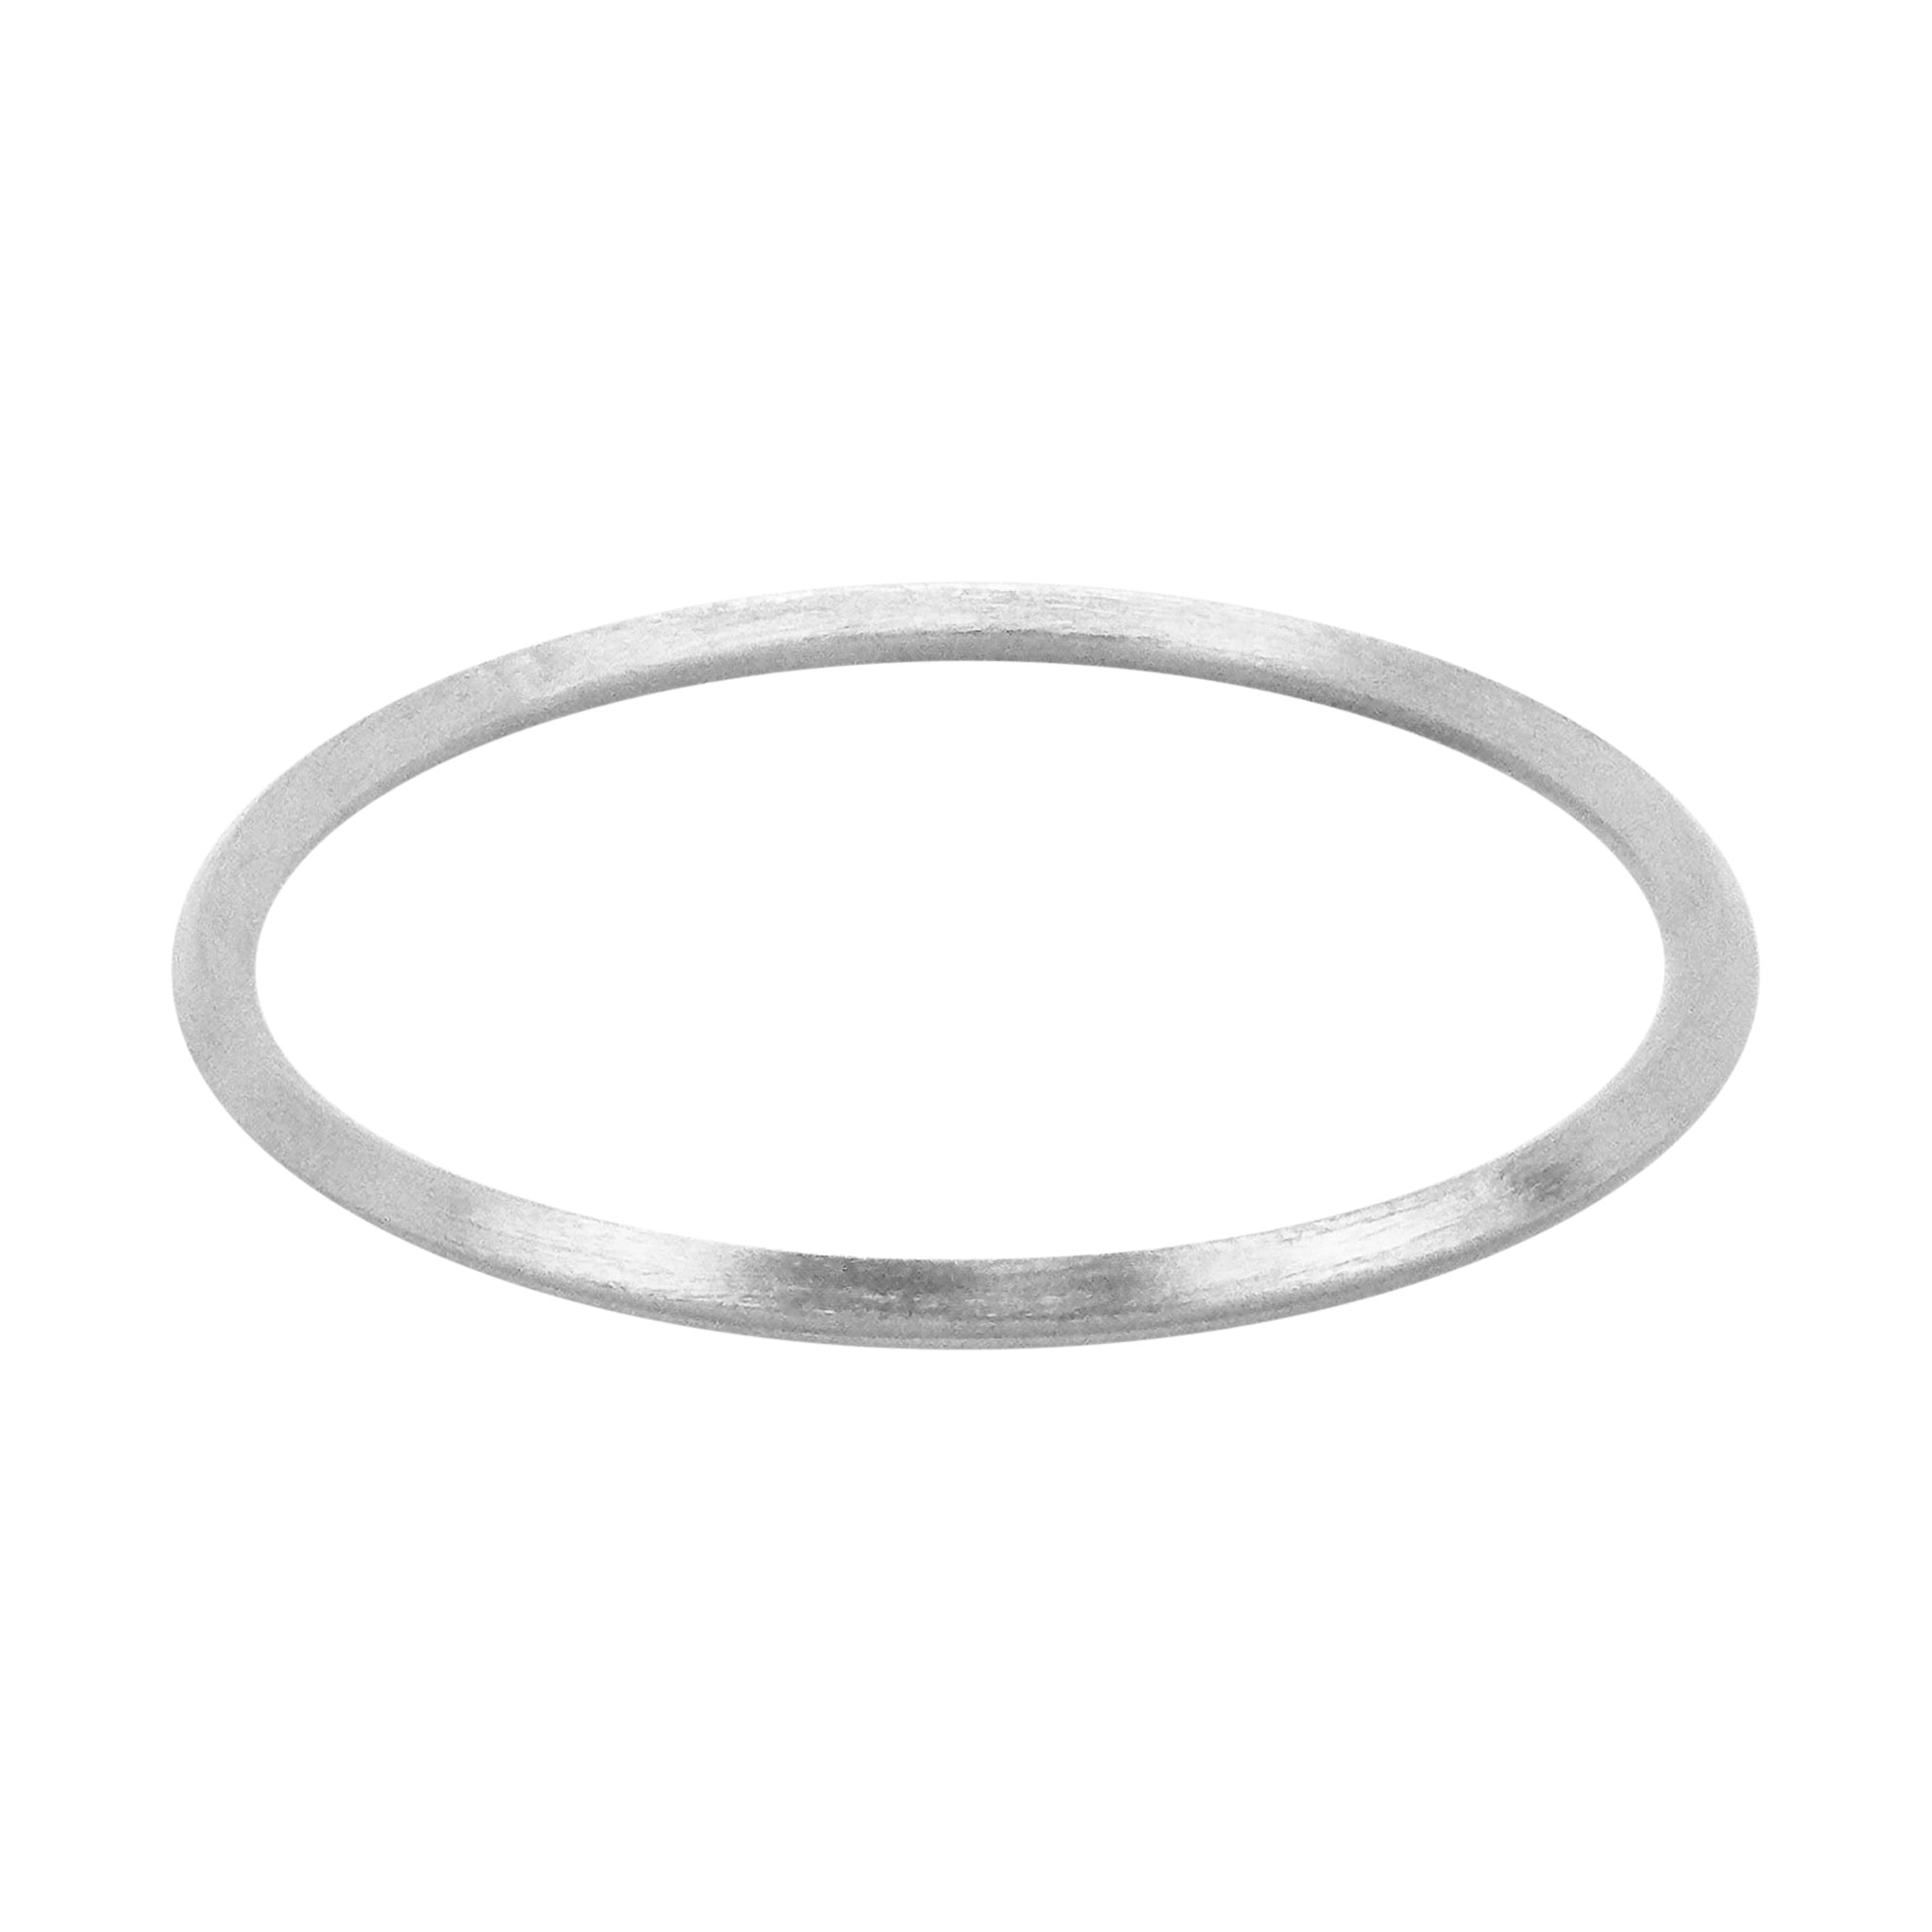 image of Sheila Fajl Pyramid Bangle Bracelet in Silver Plated